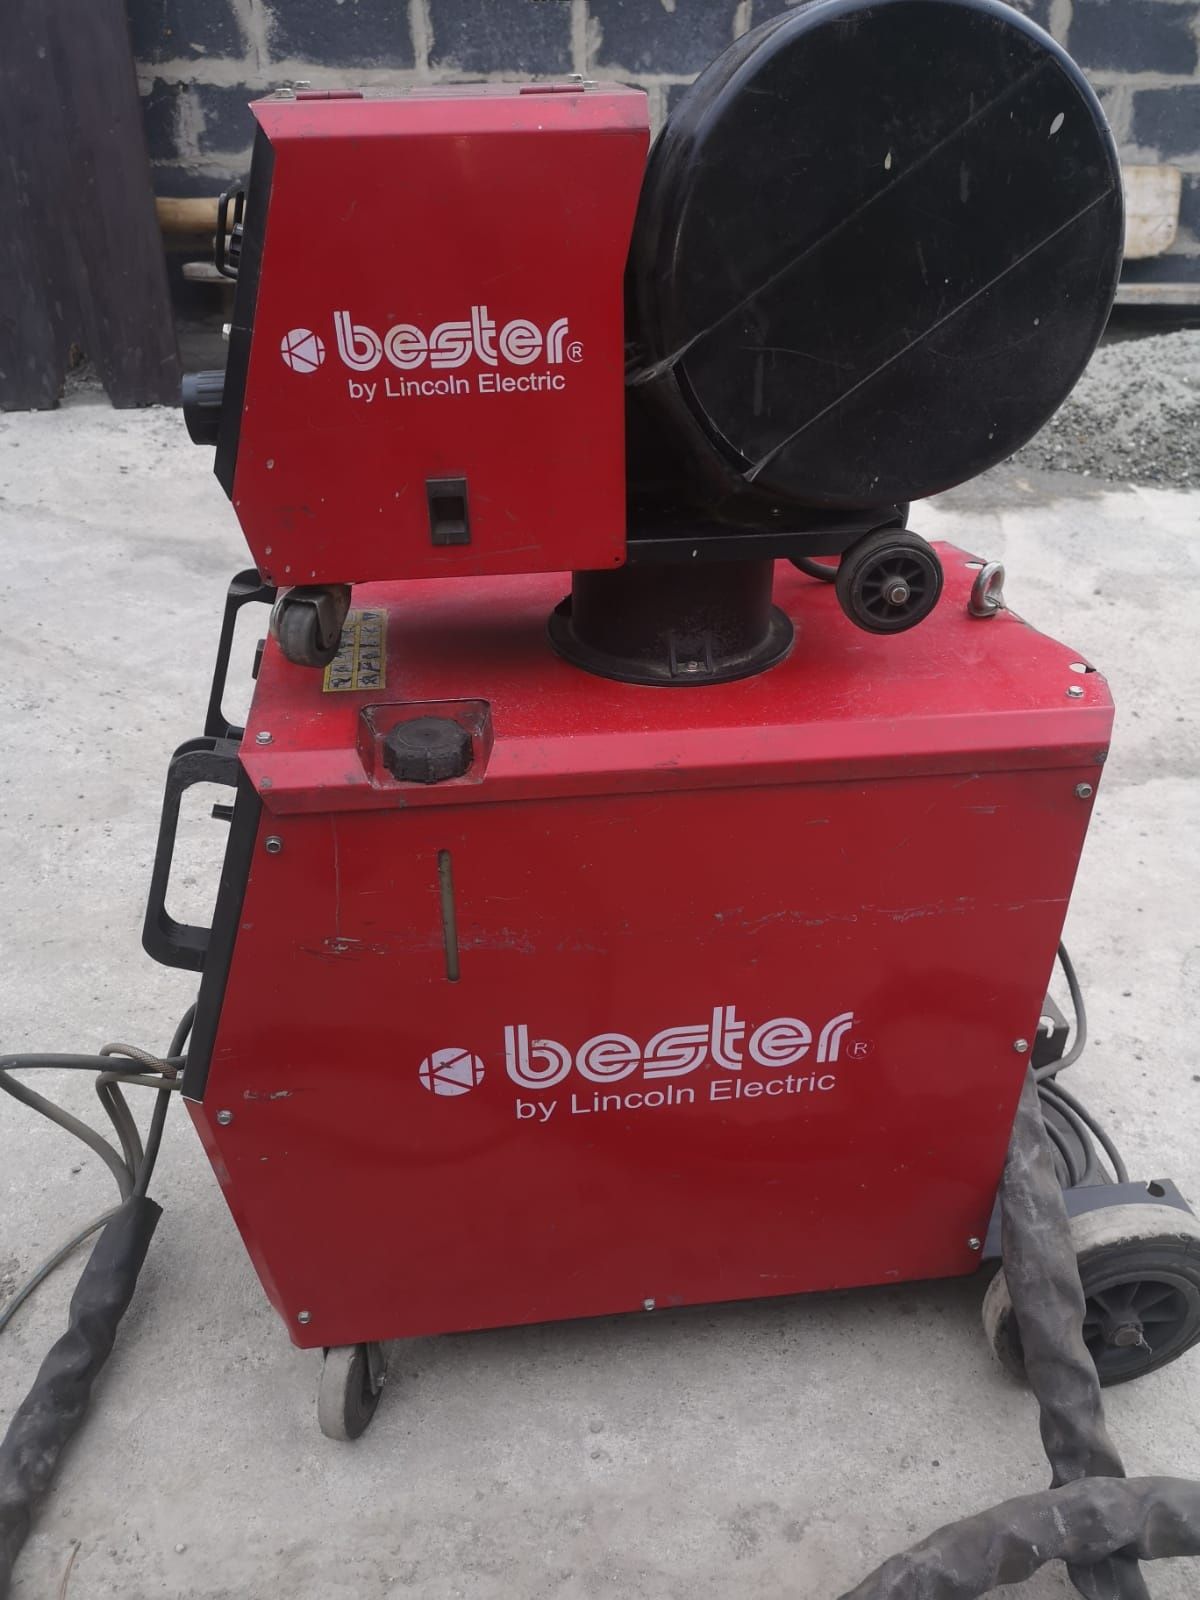 Lincoln Bester magster 450w